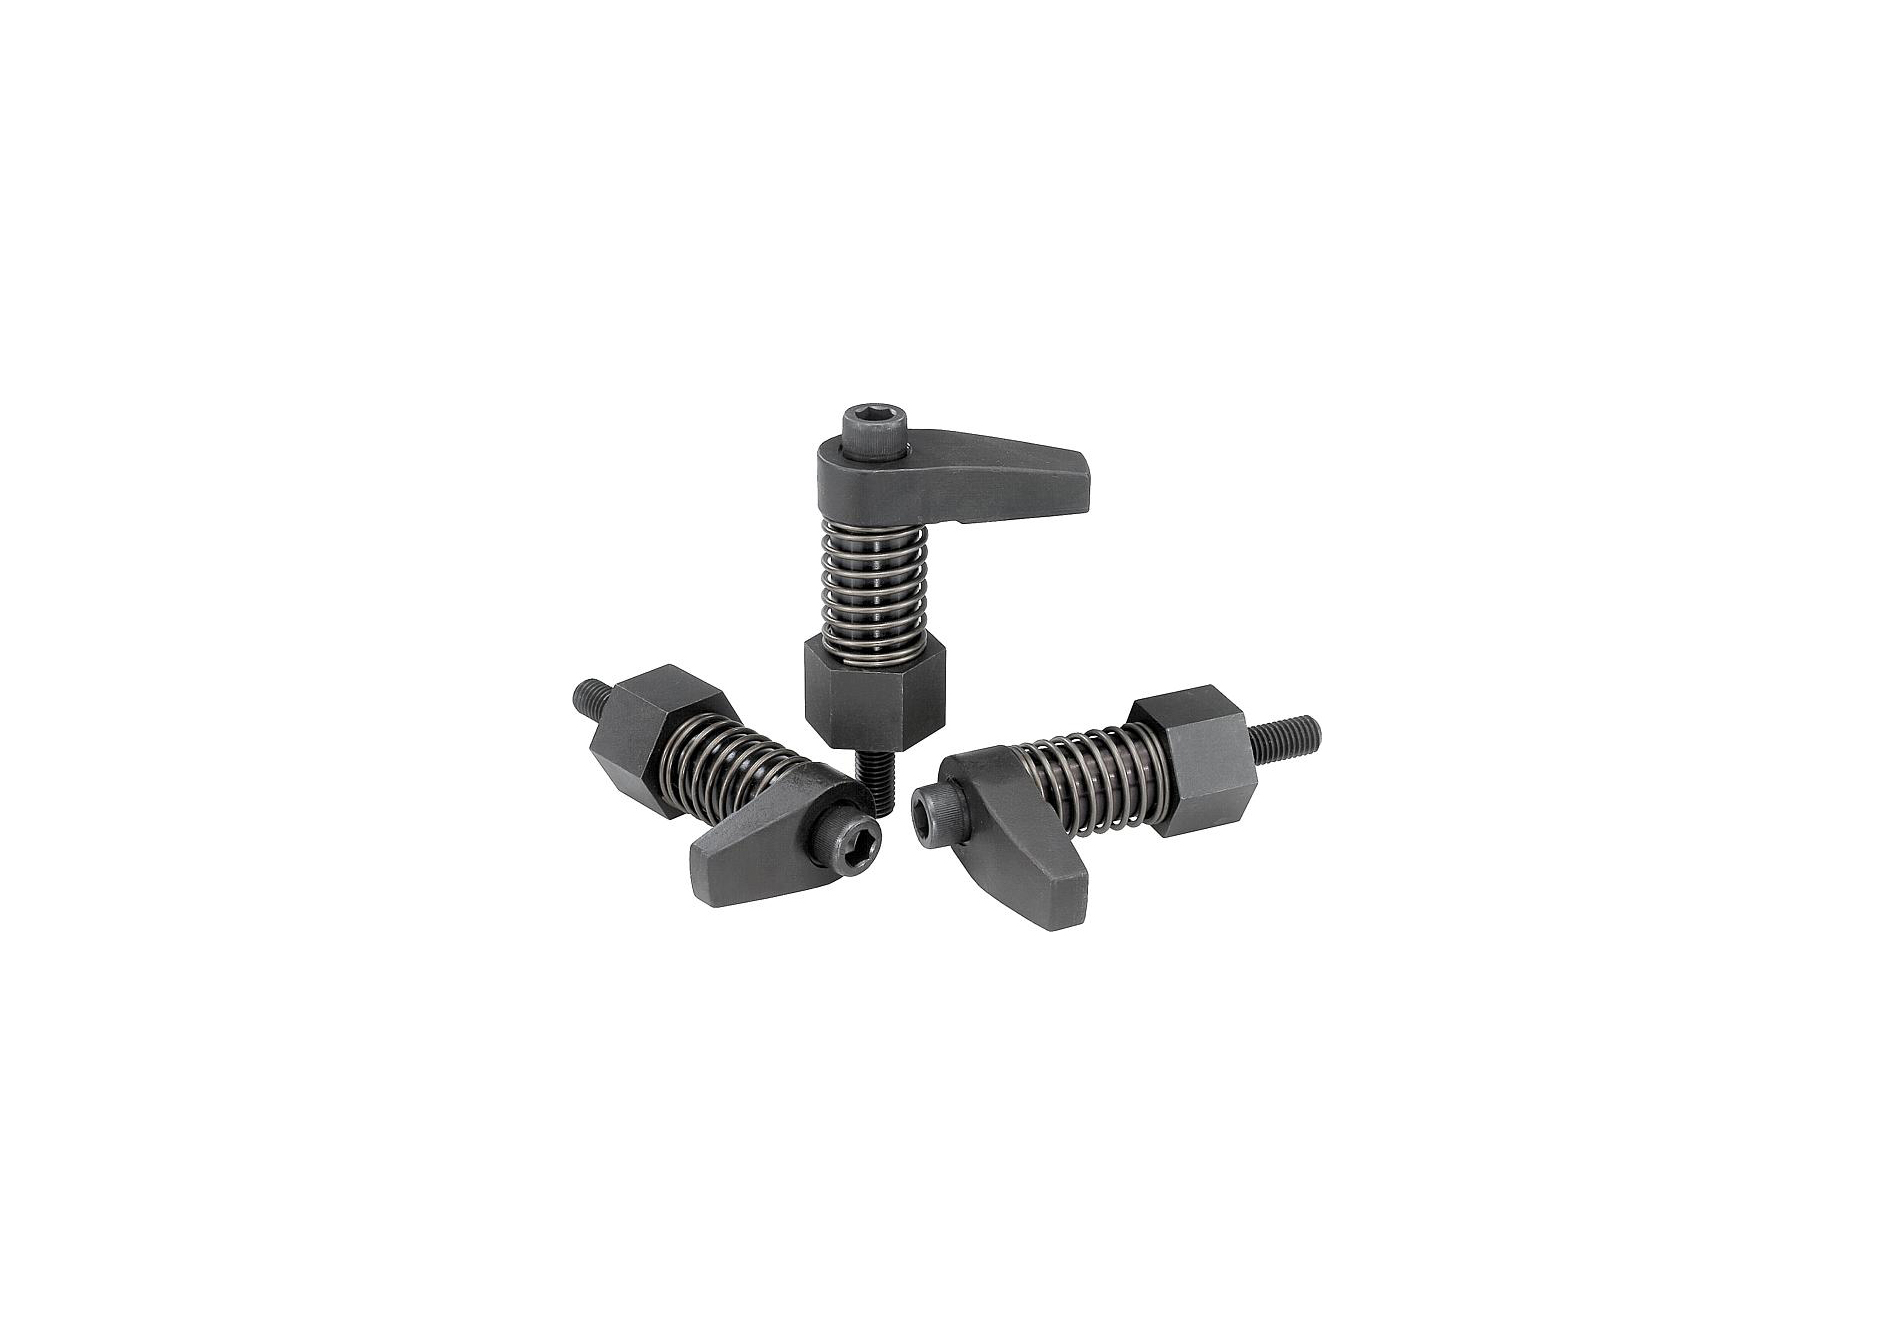 K0015 Hook clamps with collar